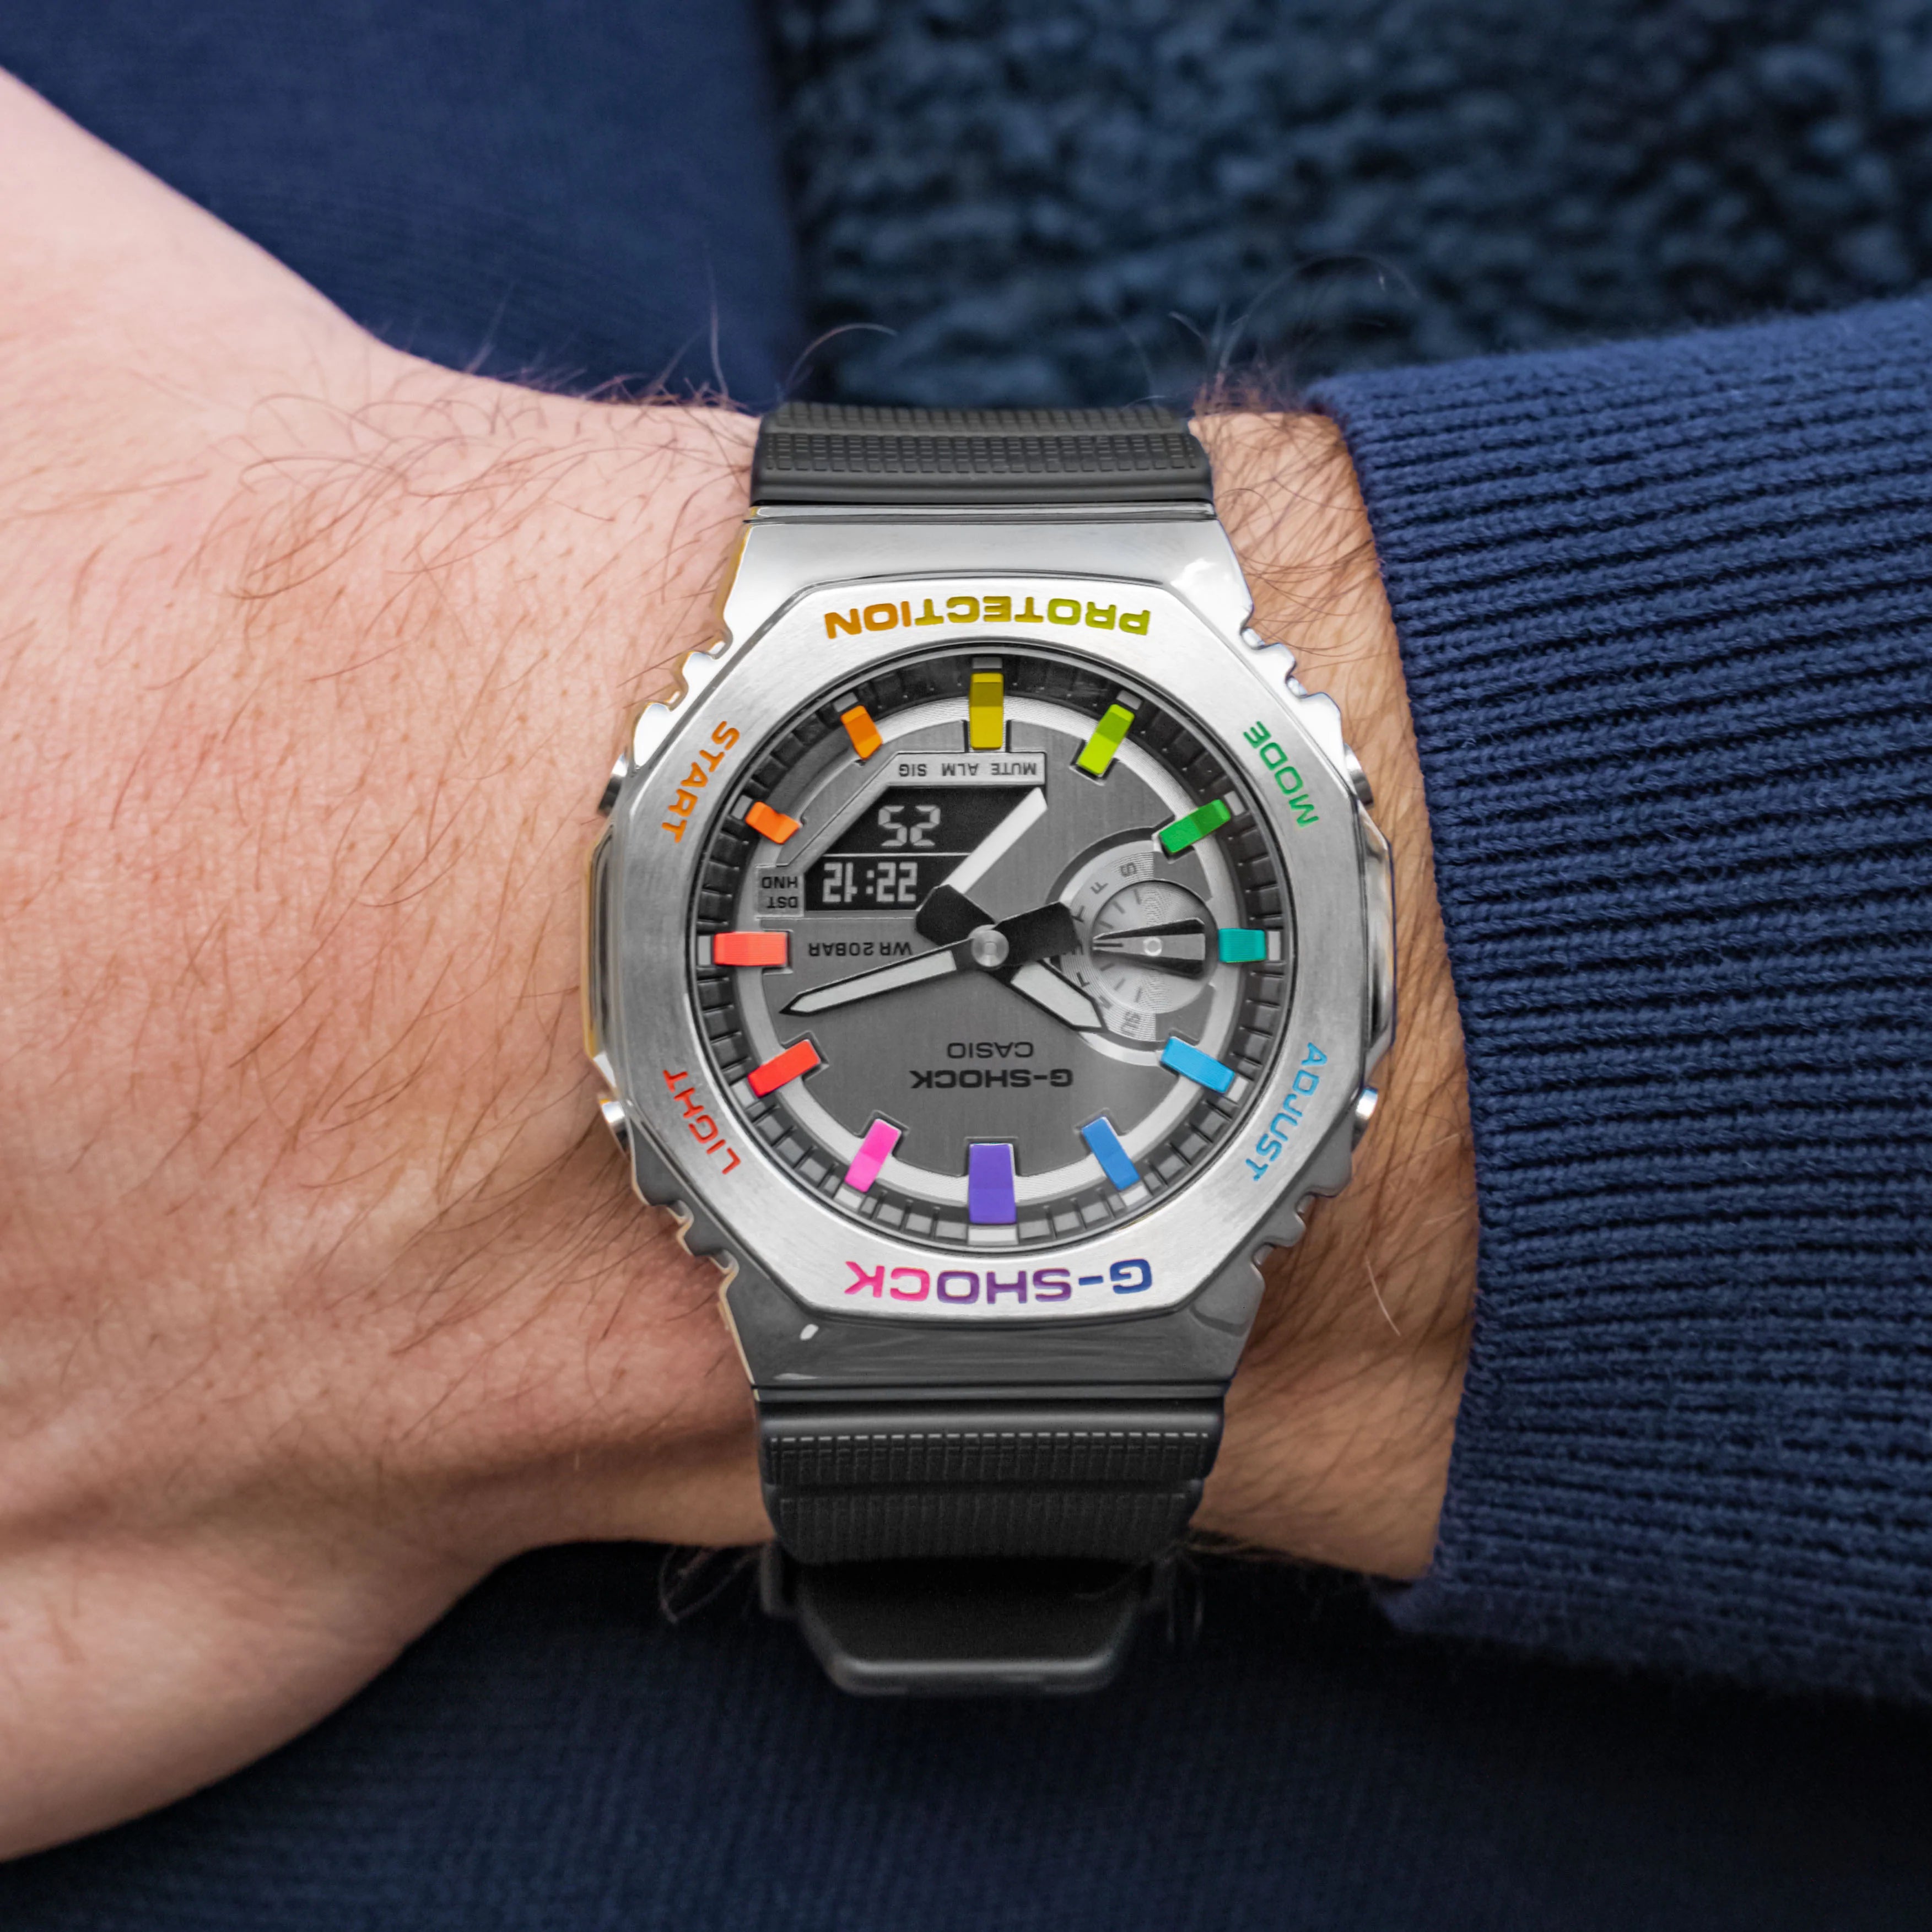 Modified G-Shock with Colourful Indices and Outer Case - CasiOak Grey-Metal Rainbow